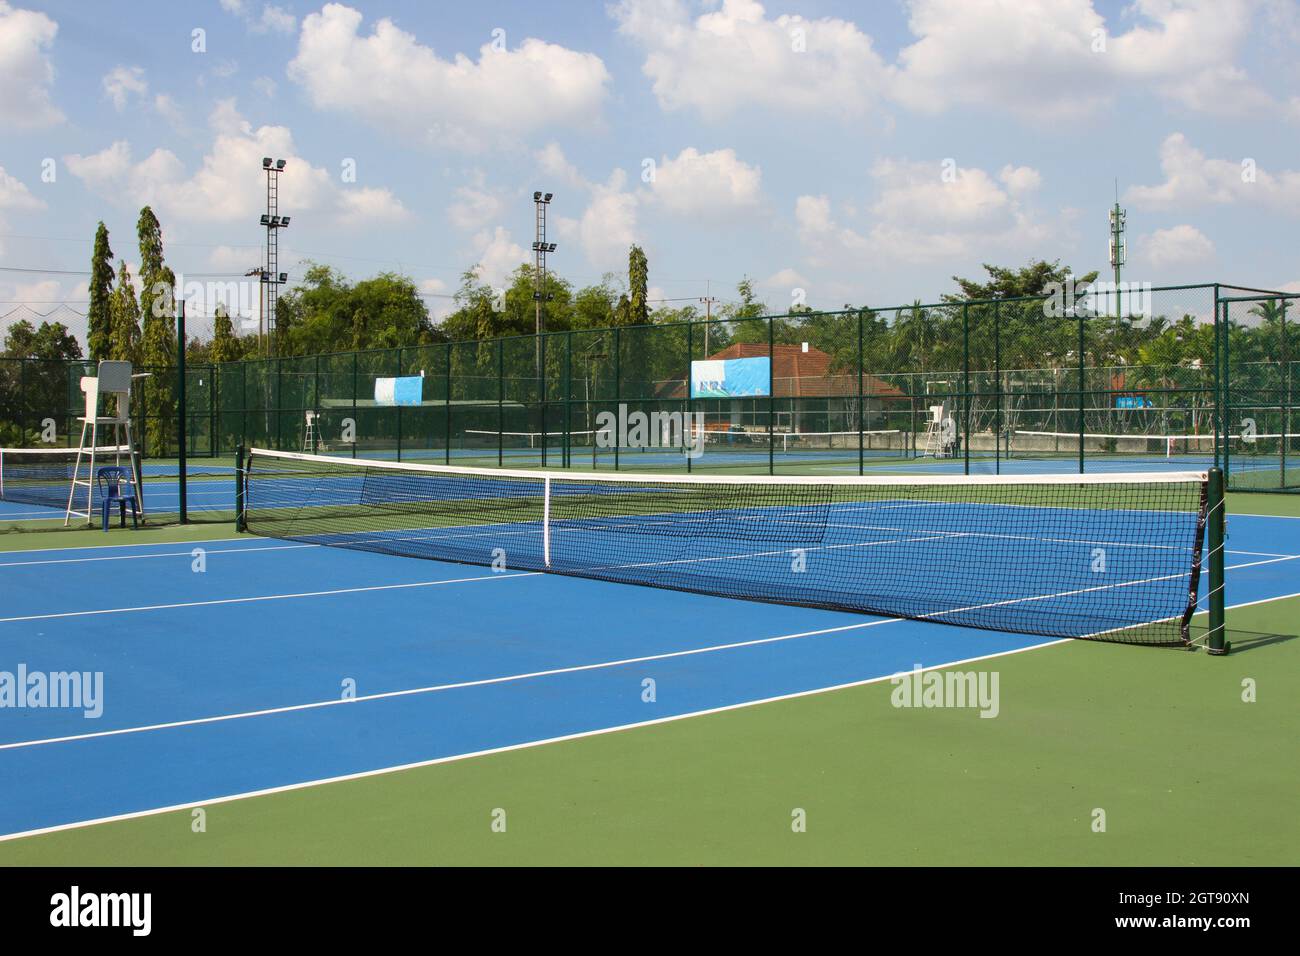 Tennis Court Outdoors With Net In Daylights Stock Photo